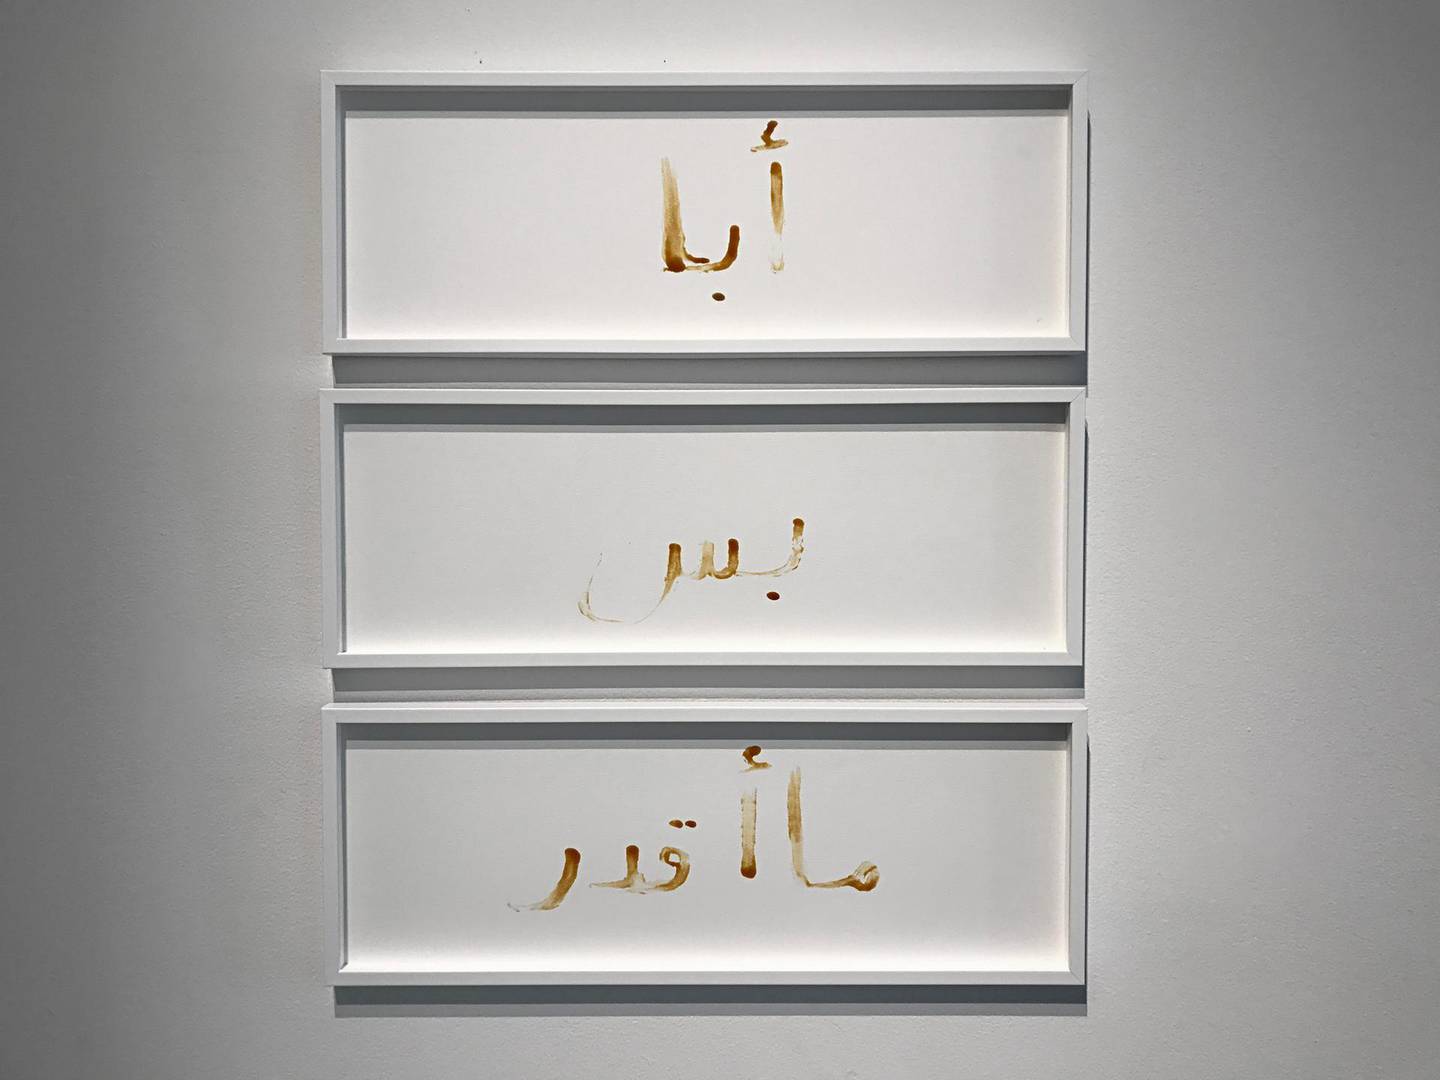 'I Want, But, I Can't' by Shamma Al Amri. Photo by Walter Willems